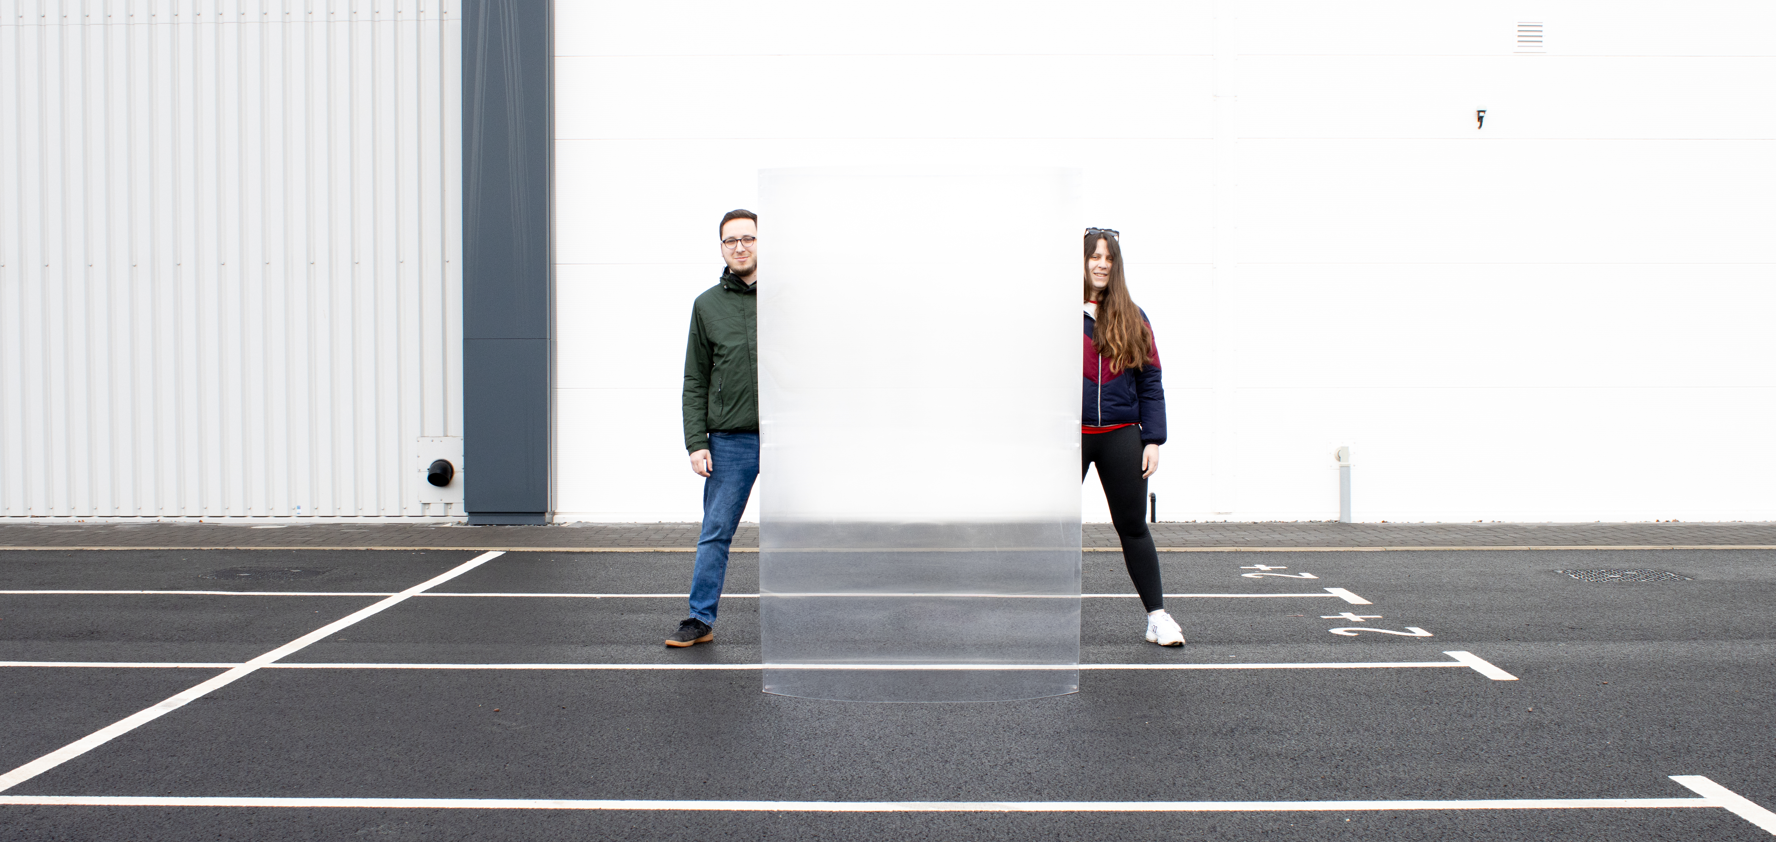 A man and woman standing behind an invisibility shield in a carpark.